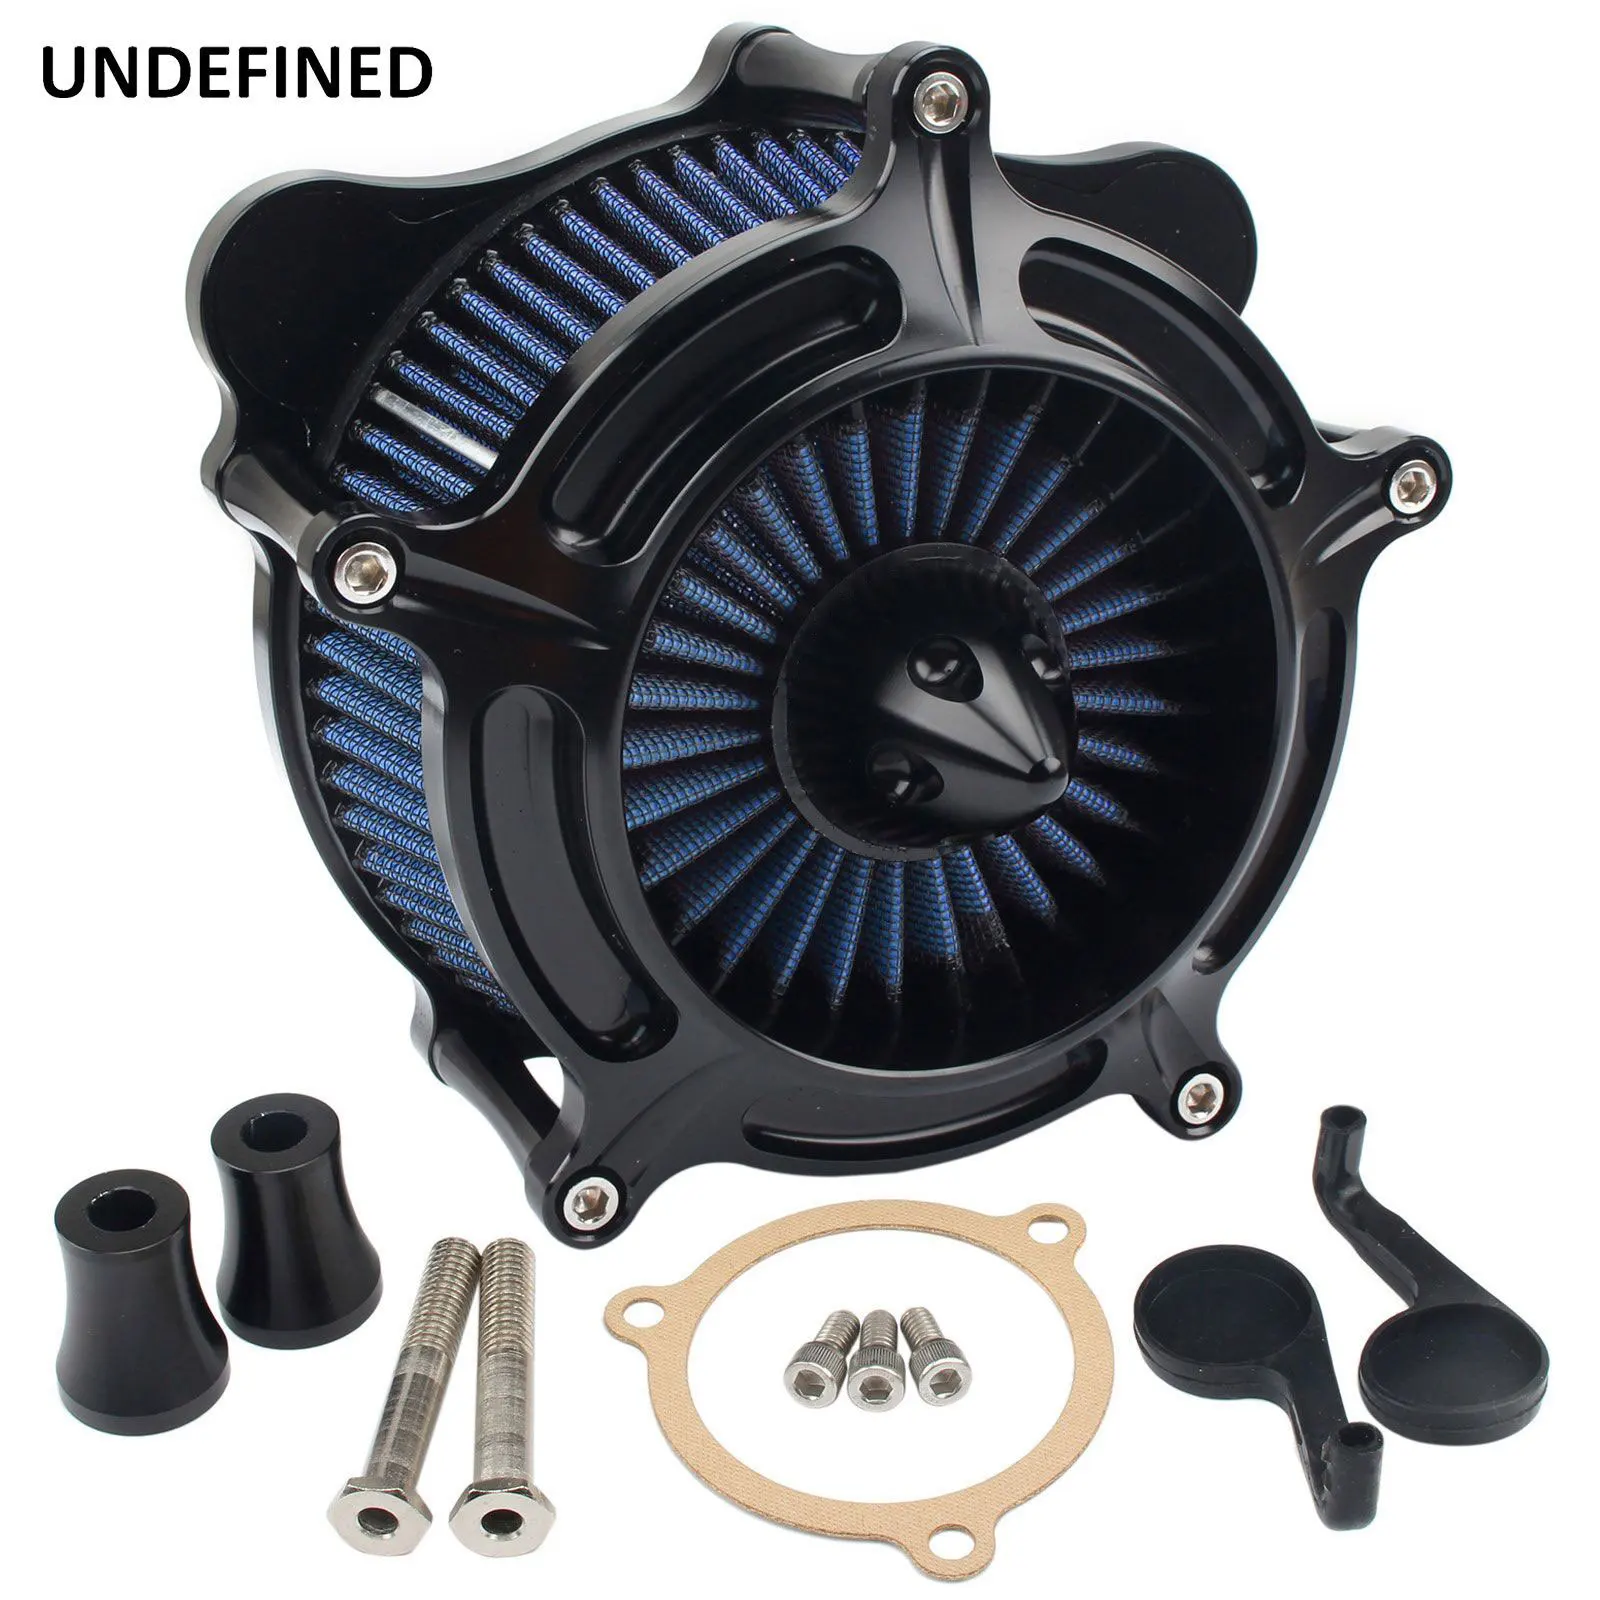 

Motorcycle Air Filter Cleaner Intake Kit Blue Element For Harley Dyna FXDLS Touring Electra Street Tir Glide Road King Softail